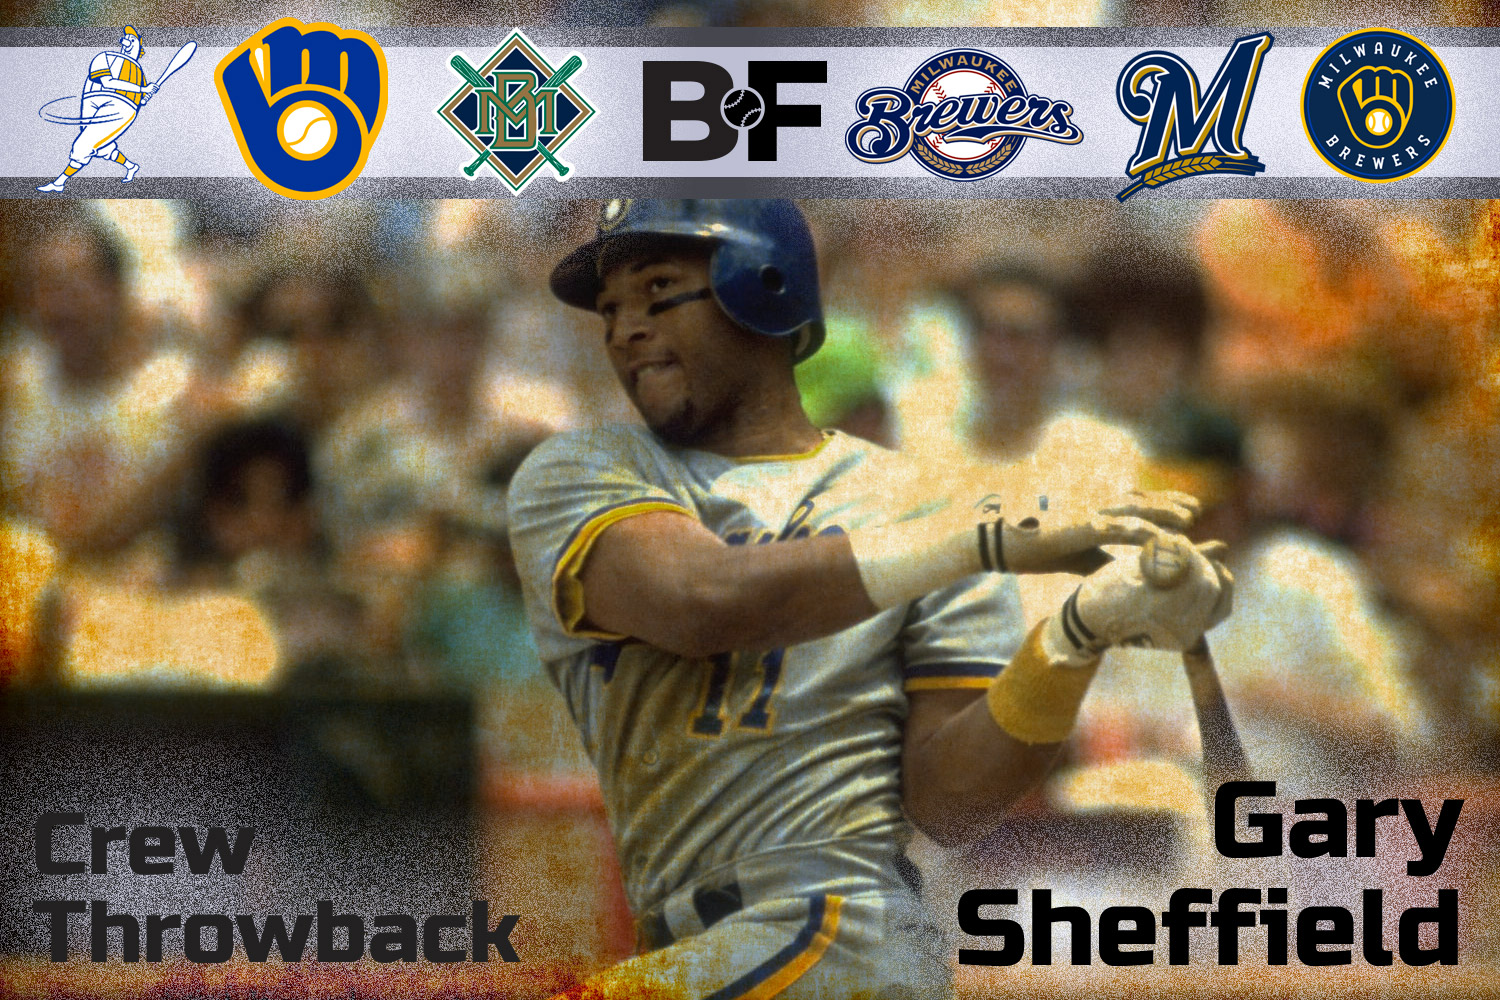 Gary Sheffield, an Immensely Talented, Polarizing Part of Brewers